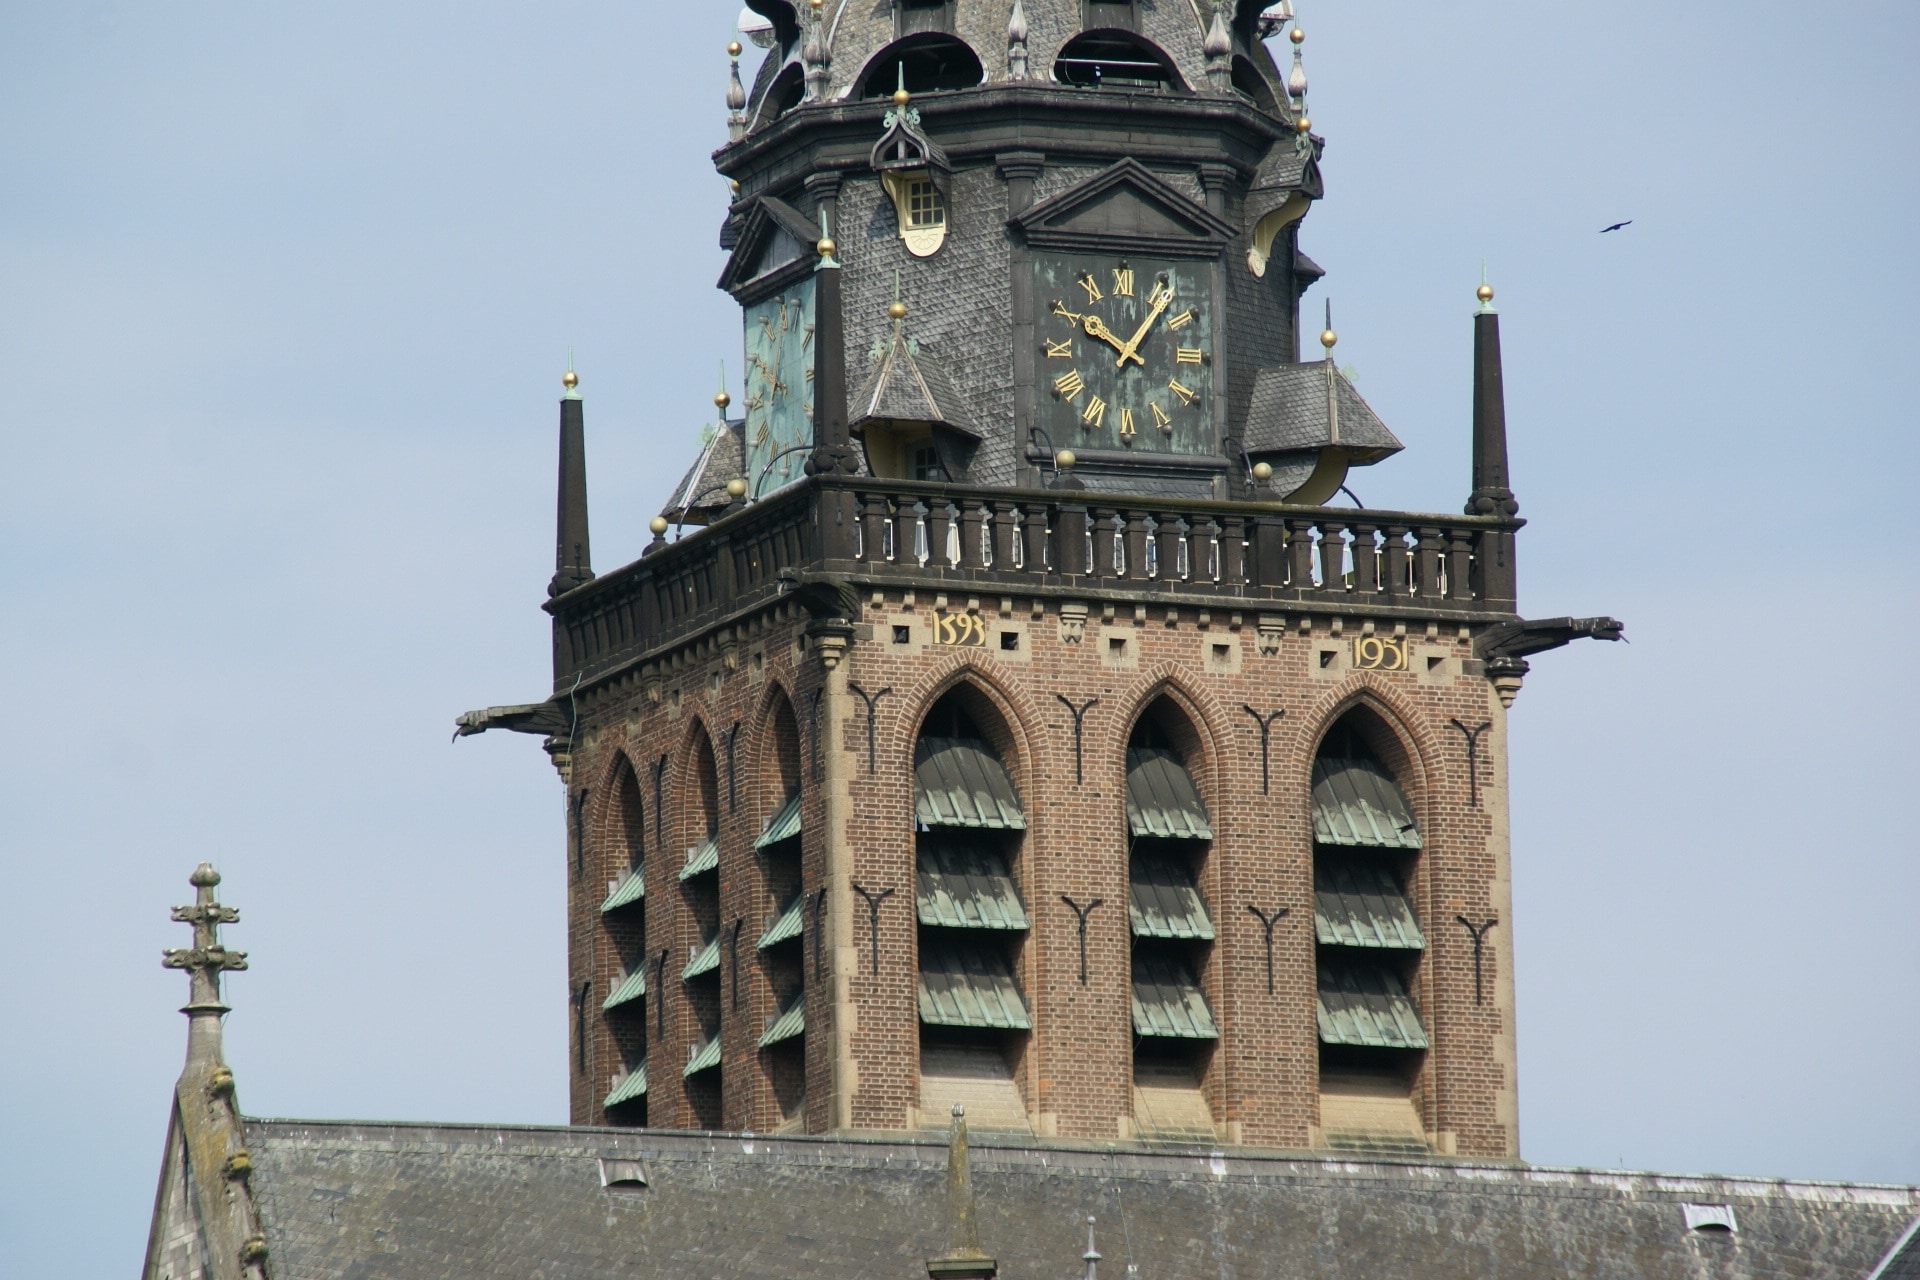 brown tower with clock